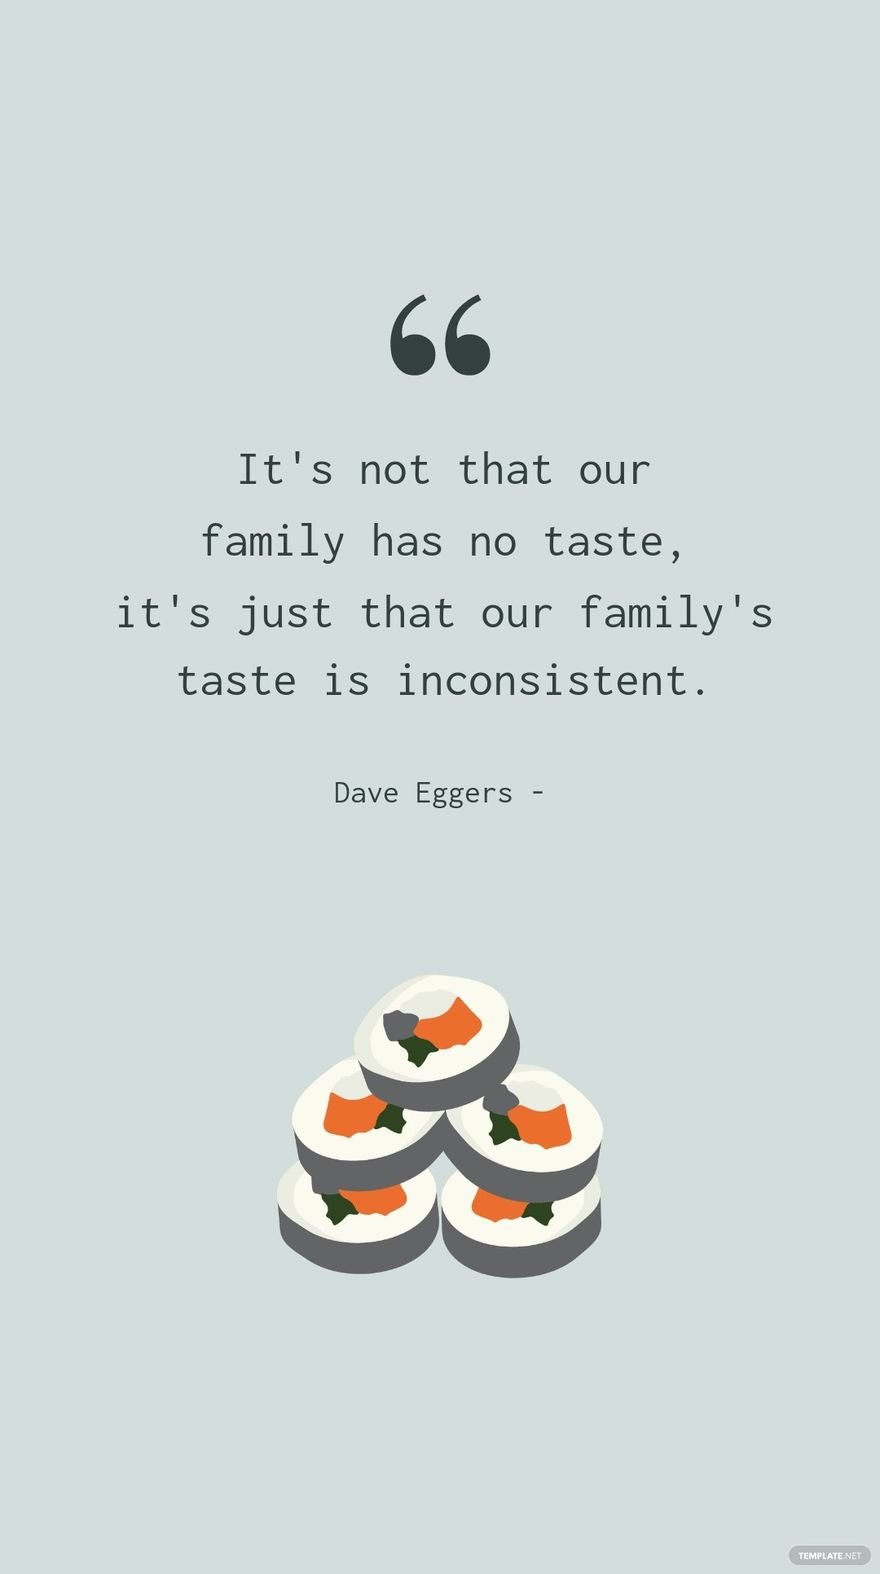 Dave Eggers - It's not that our family has no taste, it's just that our family's taste is inconsistent.